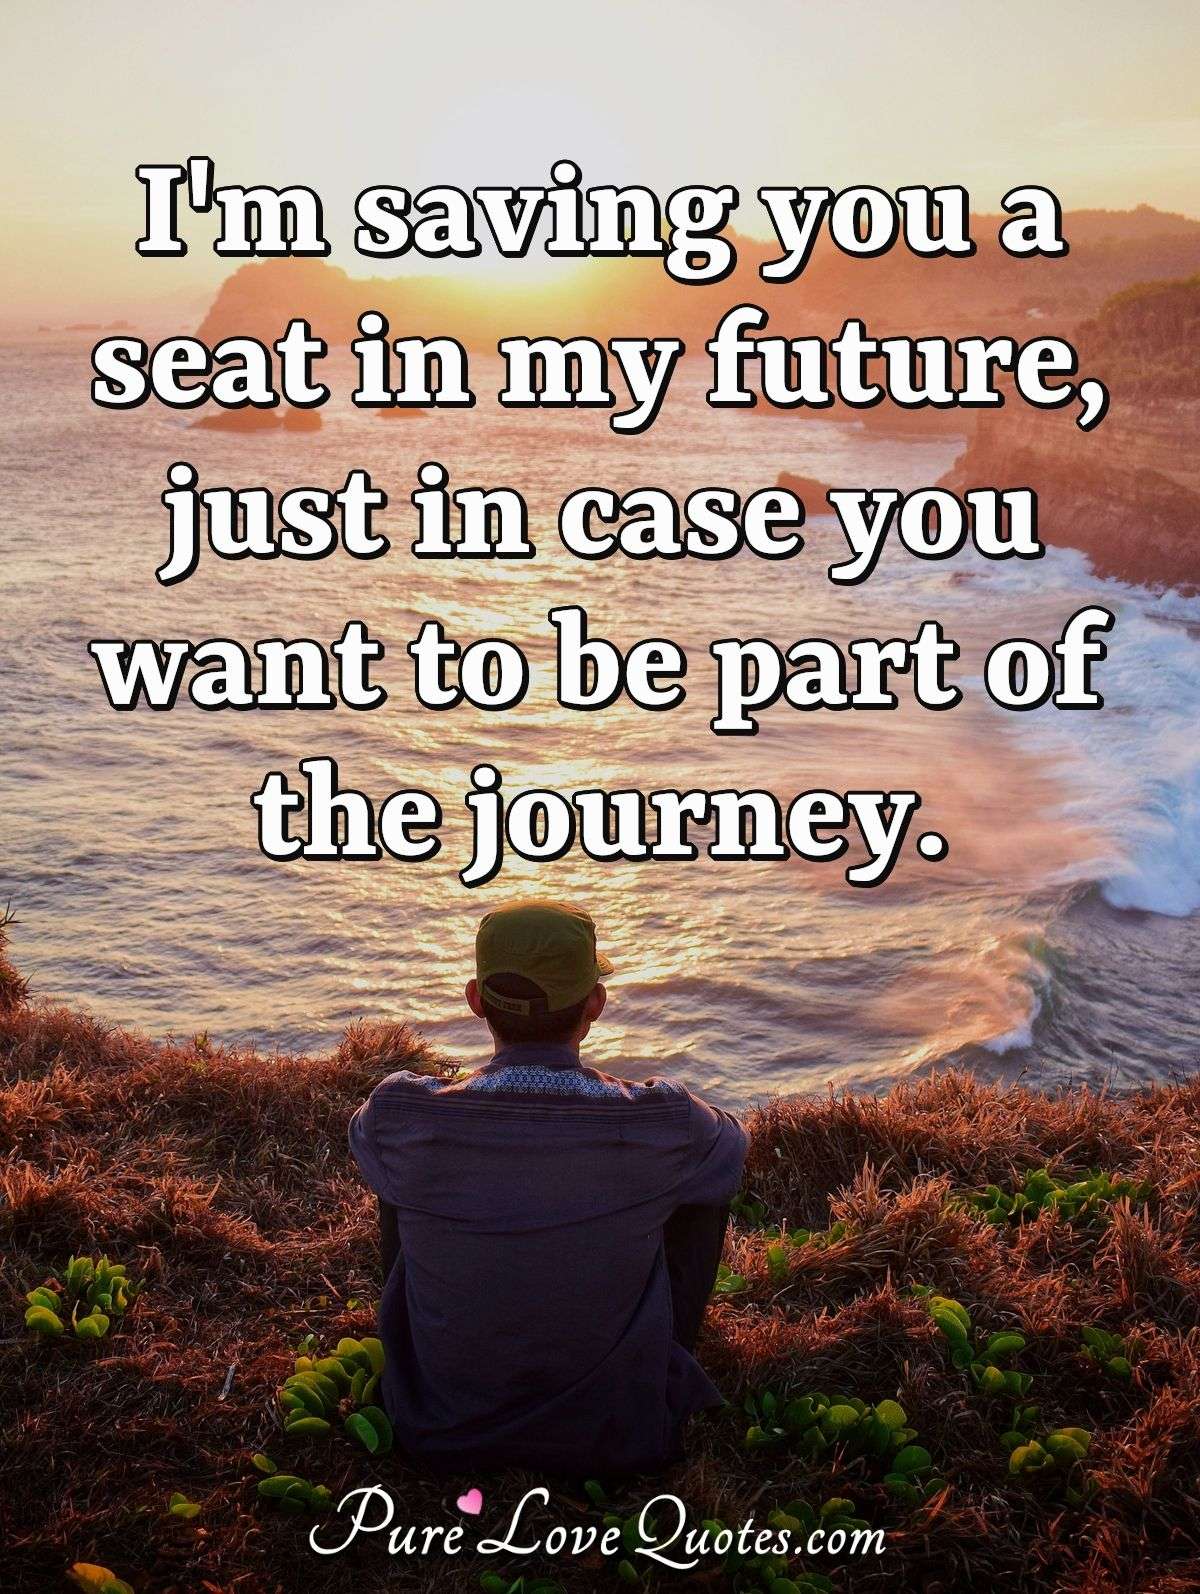 I'm saving you a seat in my future, just in case you want to be part of the journey. - Anonymous